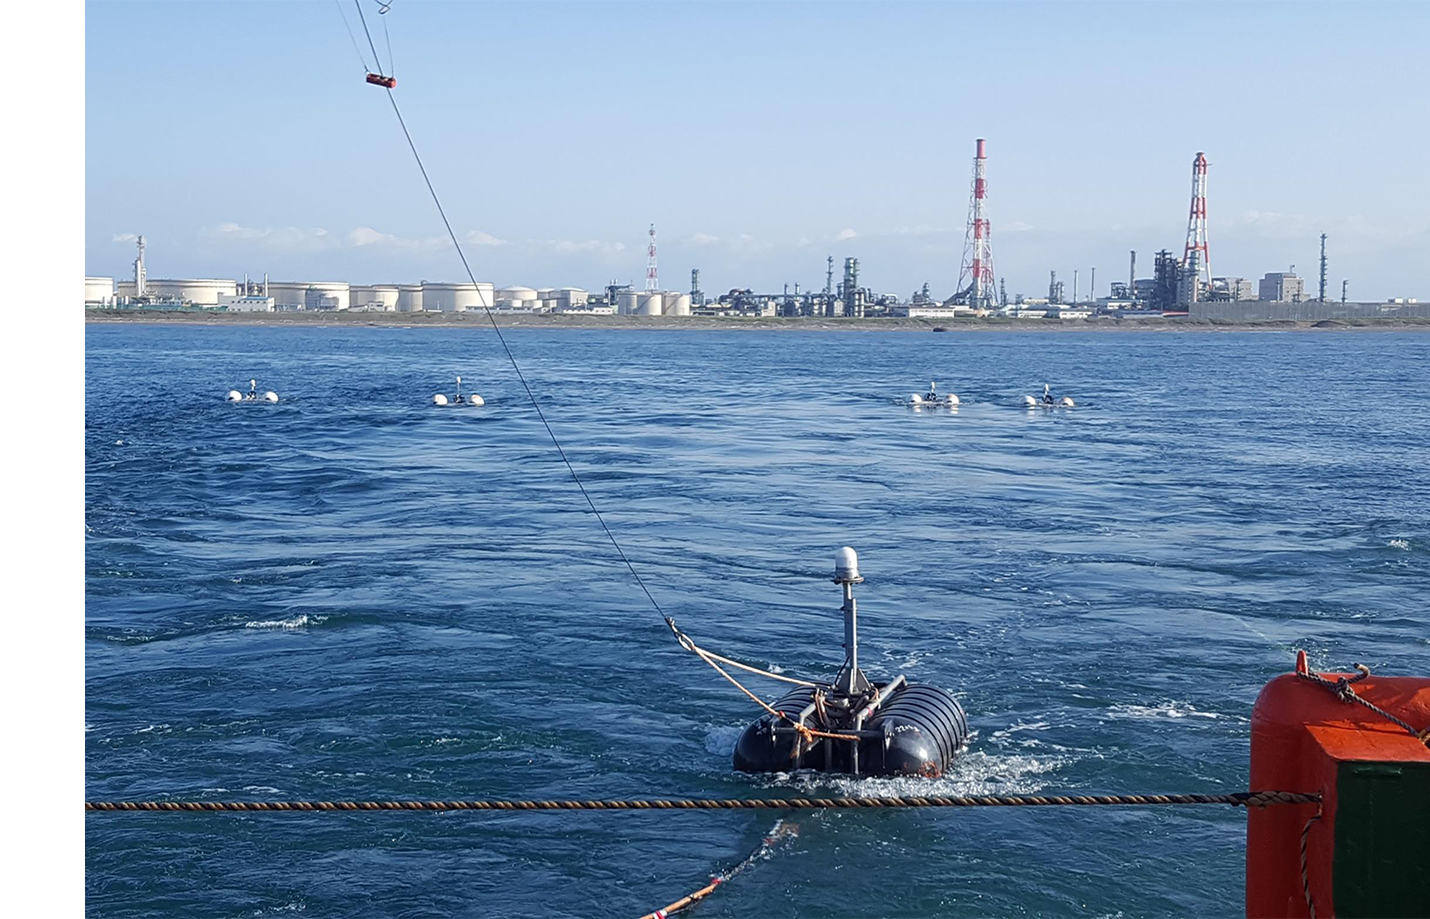 Deployment of the UHR3D system behind a vessel near Tomakomai